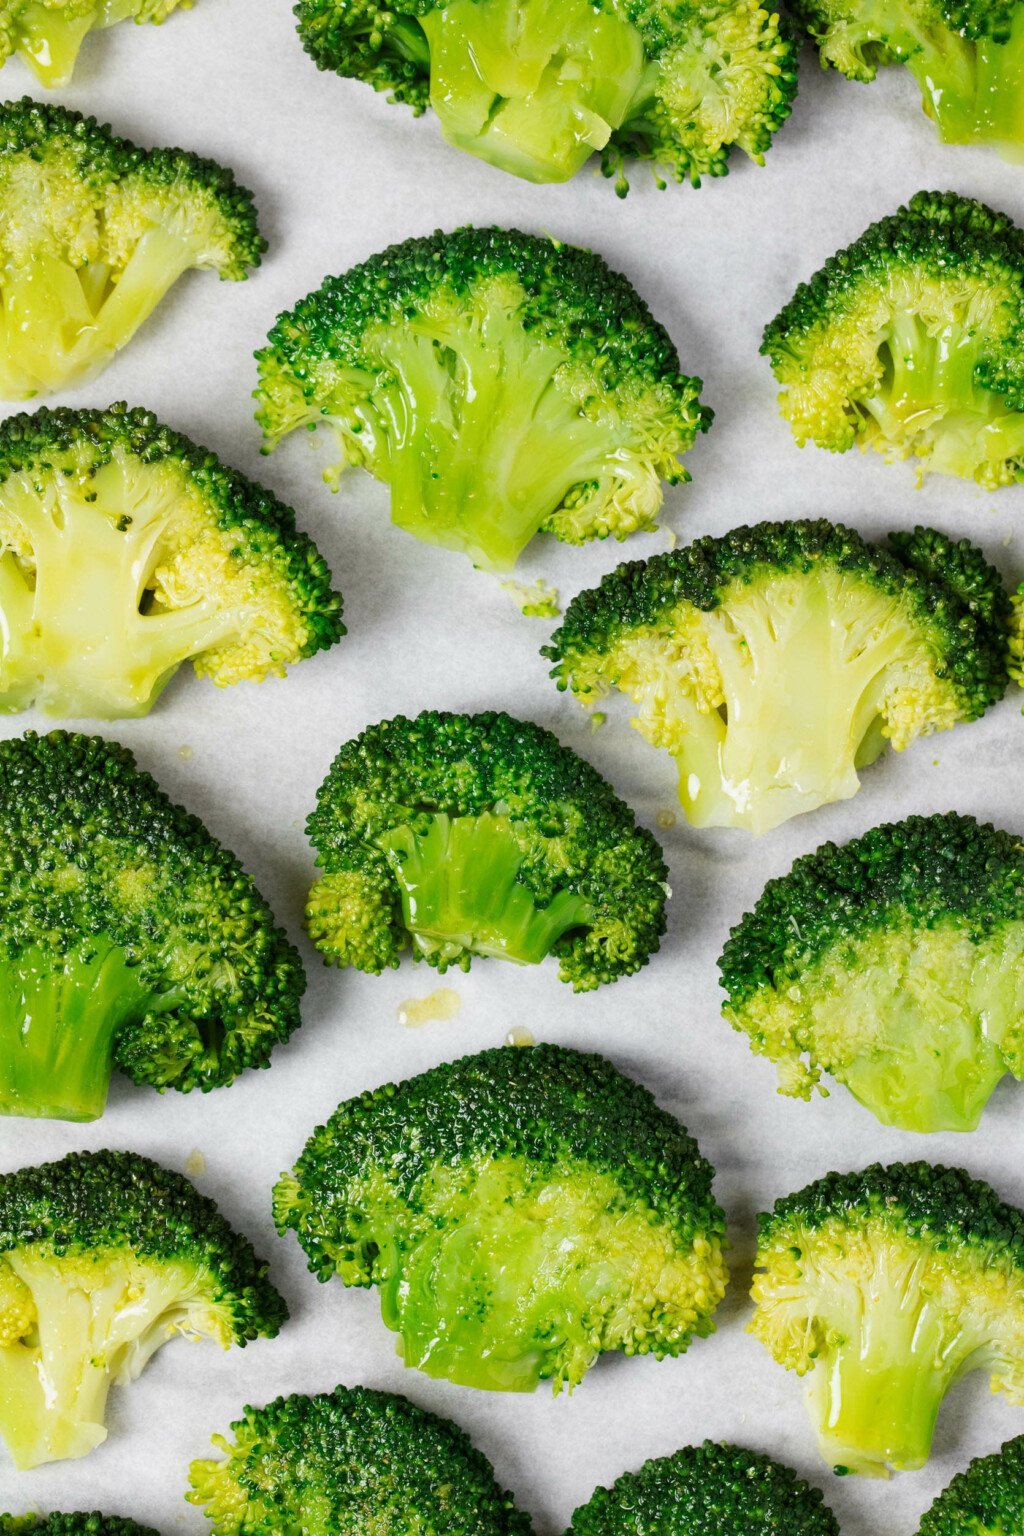 Flattened broccoli florets line a white parchment-lined baking sheet in an even pattern.